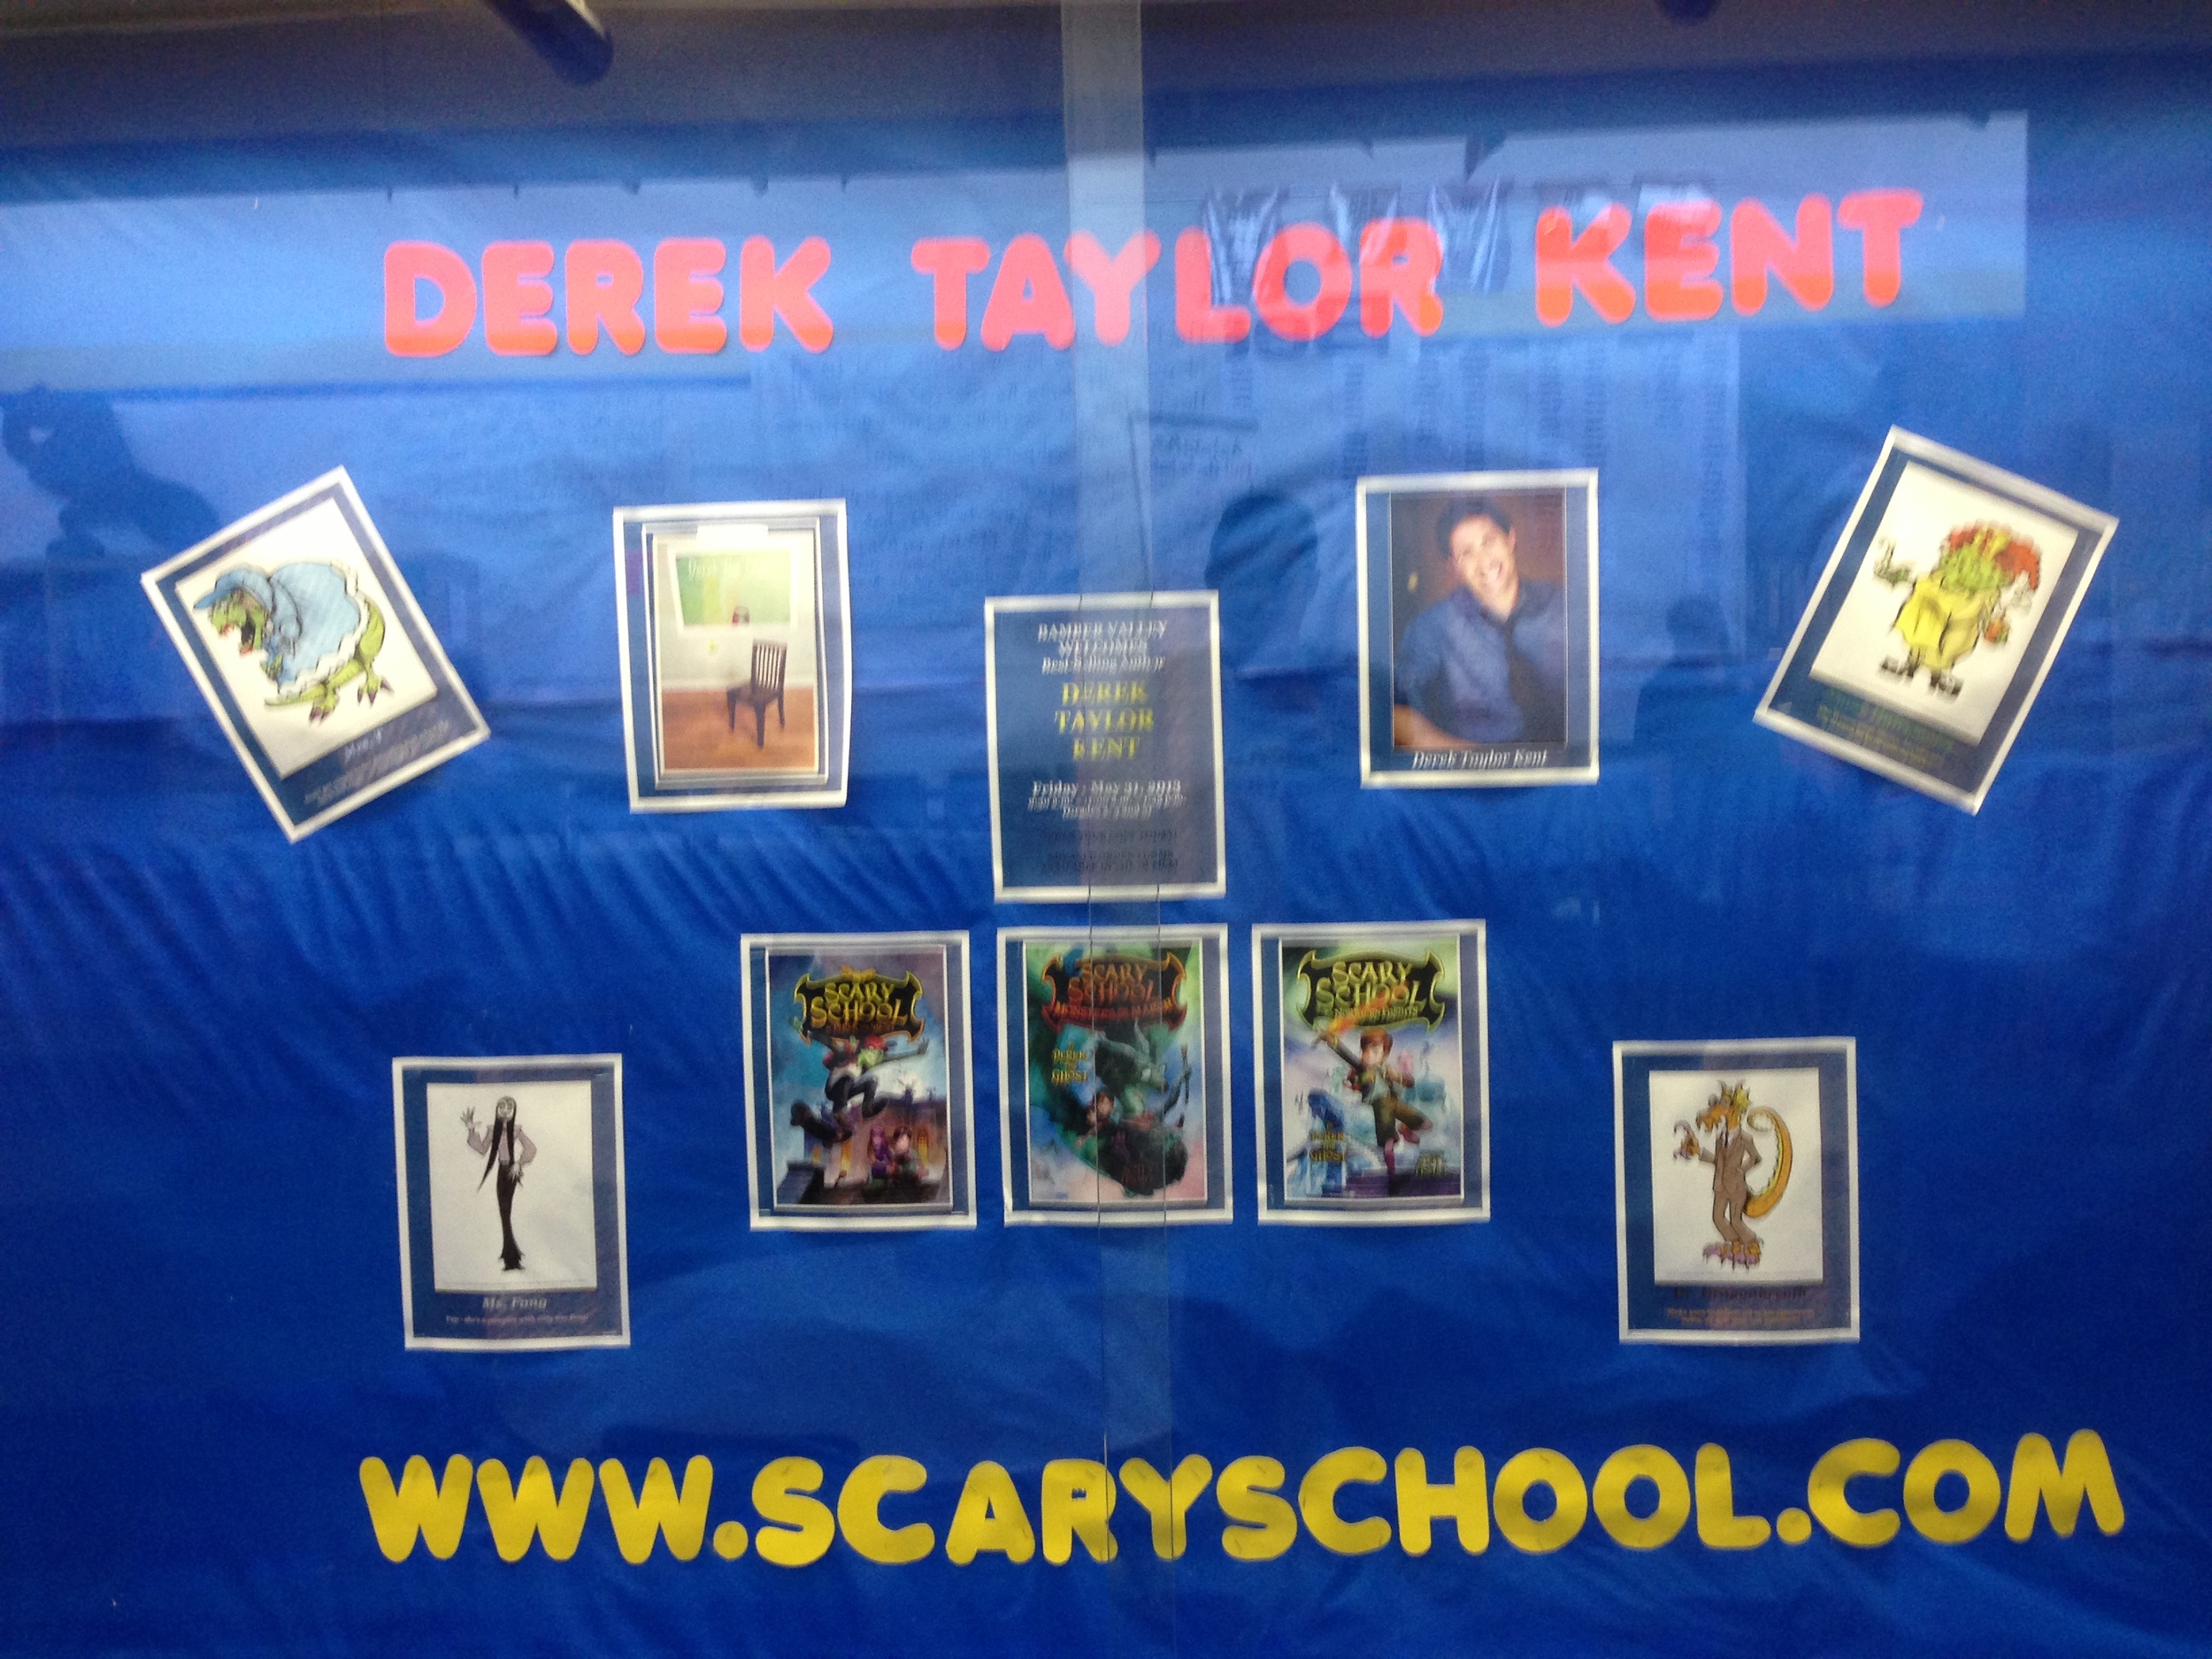 Scary School sign at Bamber Valley copy.jpg